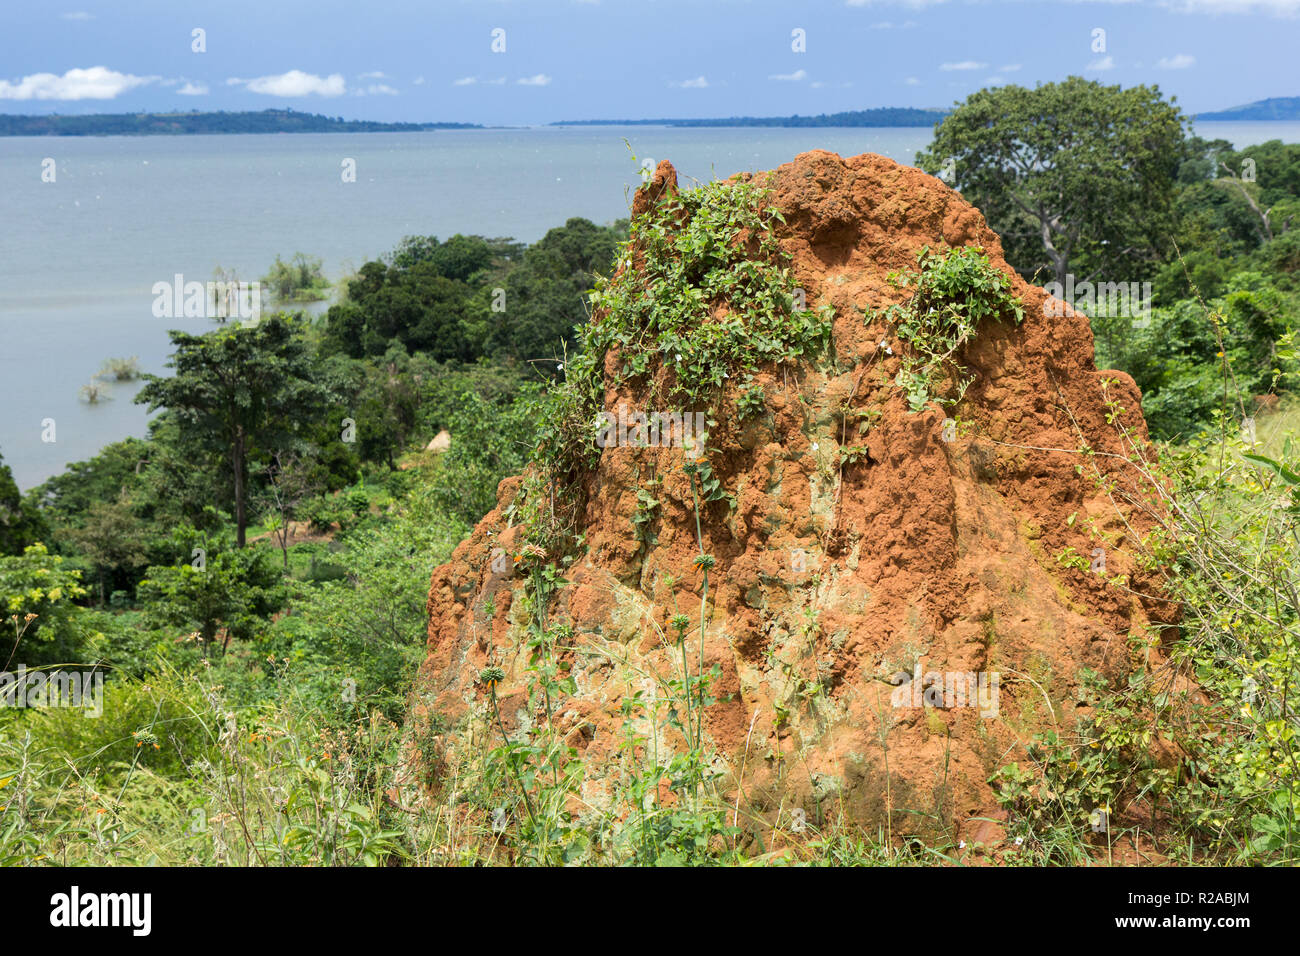 A termite ant hill (mound) in the wilderness. Lake Victoria is in the background. Photo taken in Busagazi, Uganda on May 03 2017. Stock Photo